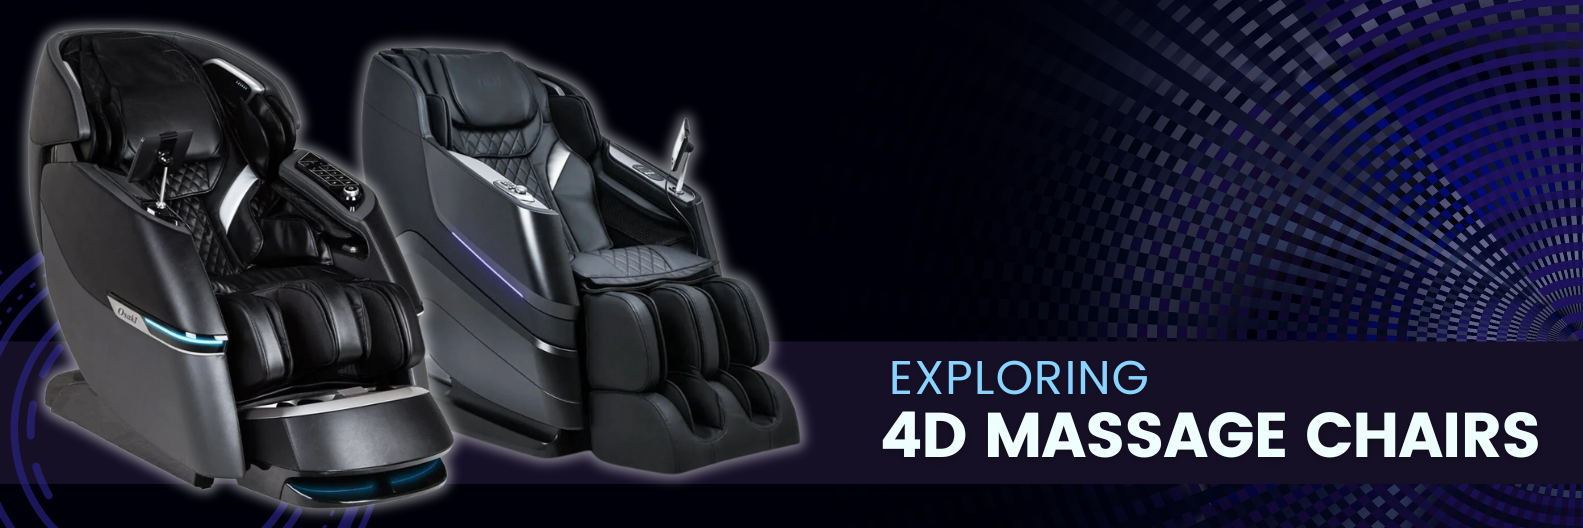 Uncover the secrets of 4D massage chair technology and investigate the various models available. Immerse yourself in a realm of relaxation and luxury with these advanced chairs.